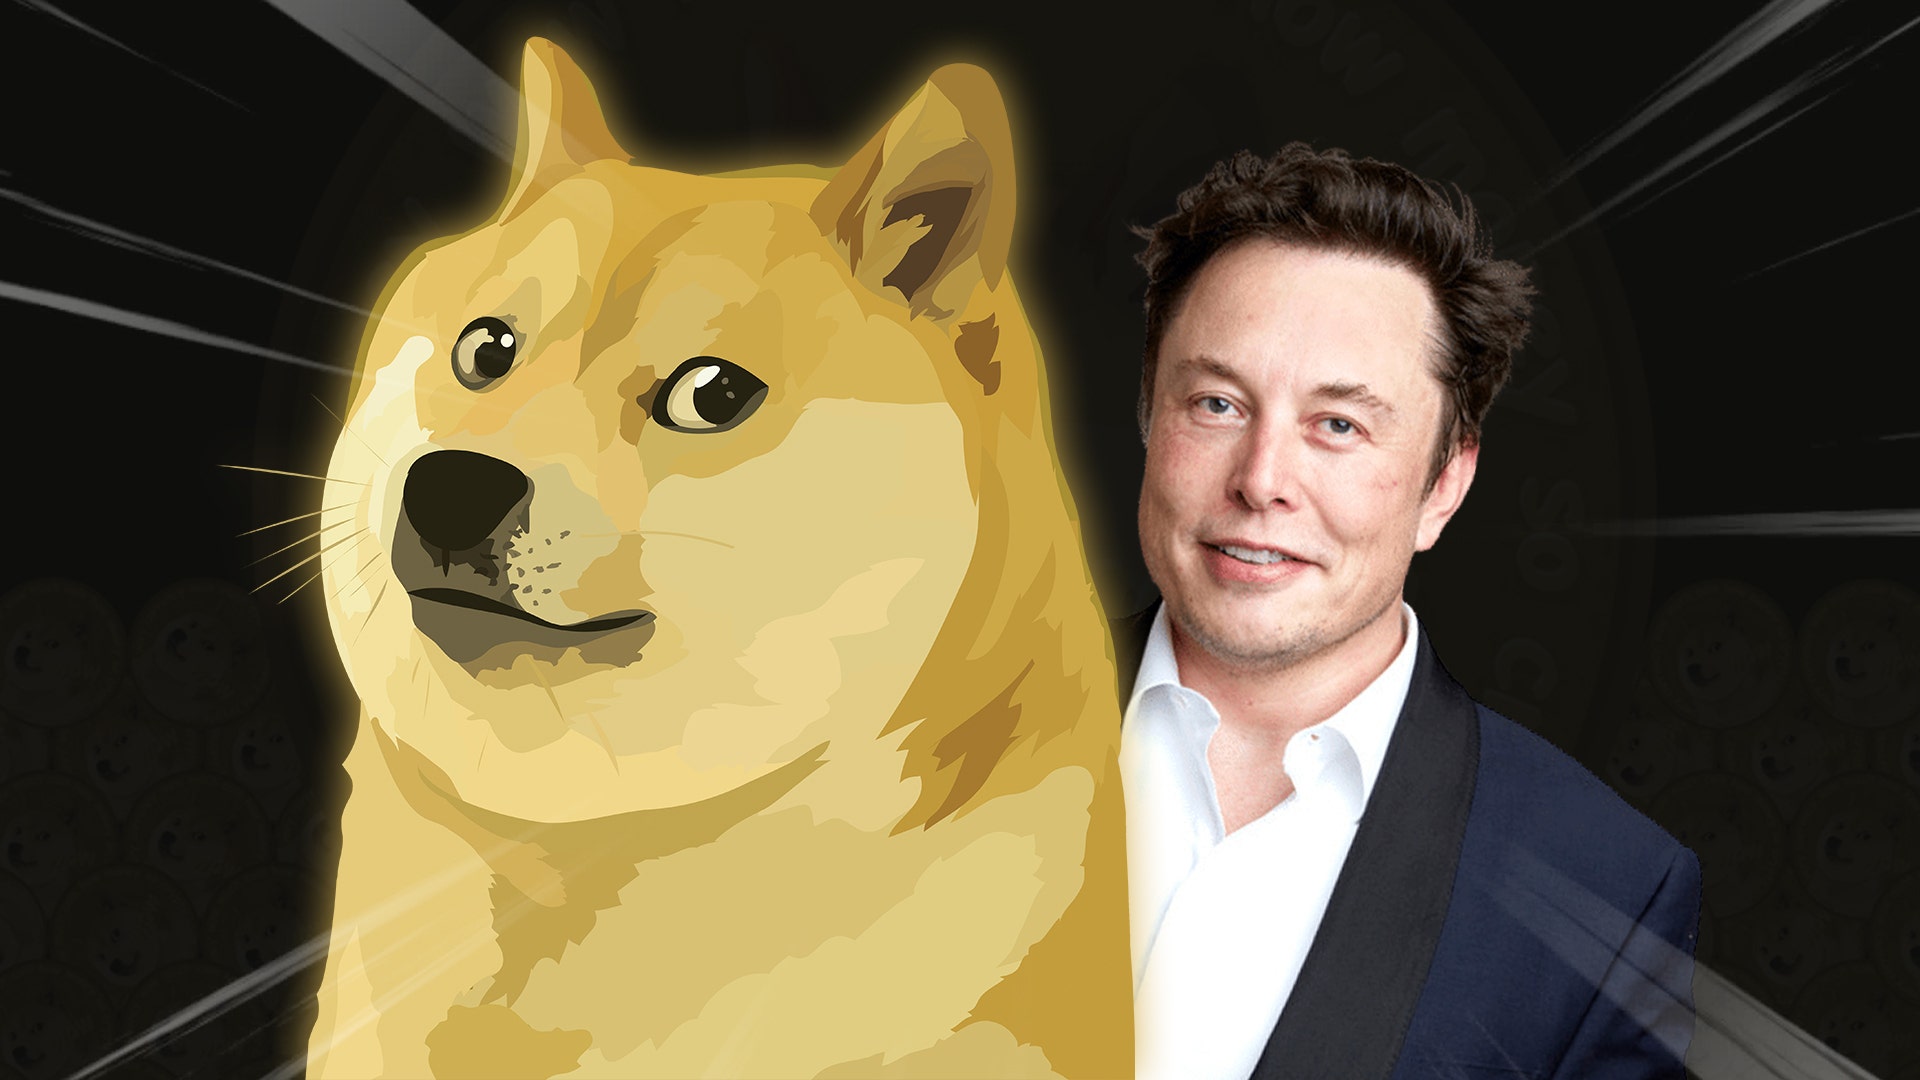 Is The Dogecoin Slump Just A 'Blip' Before A Rally? Here's What Experts Say